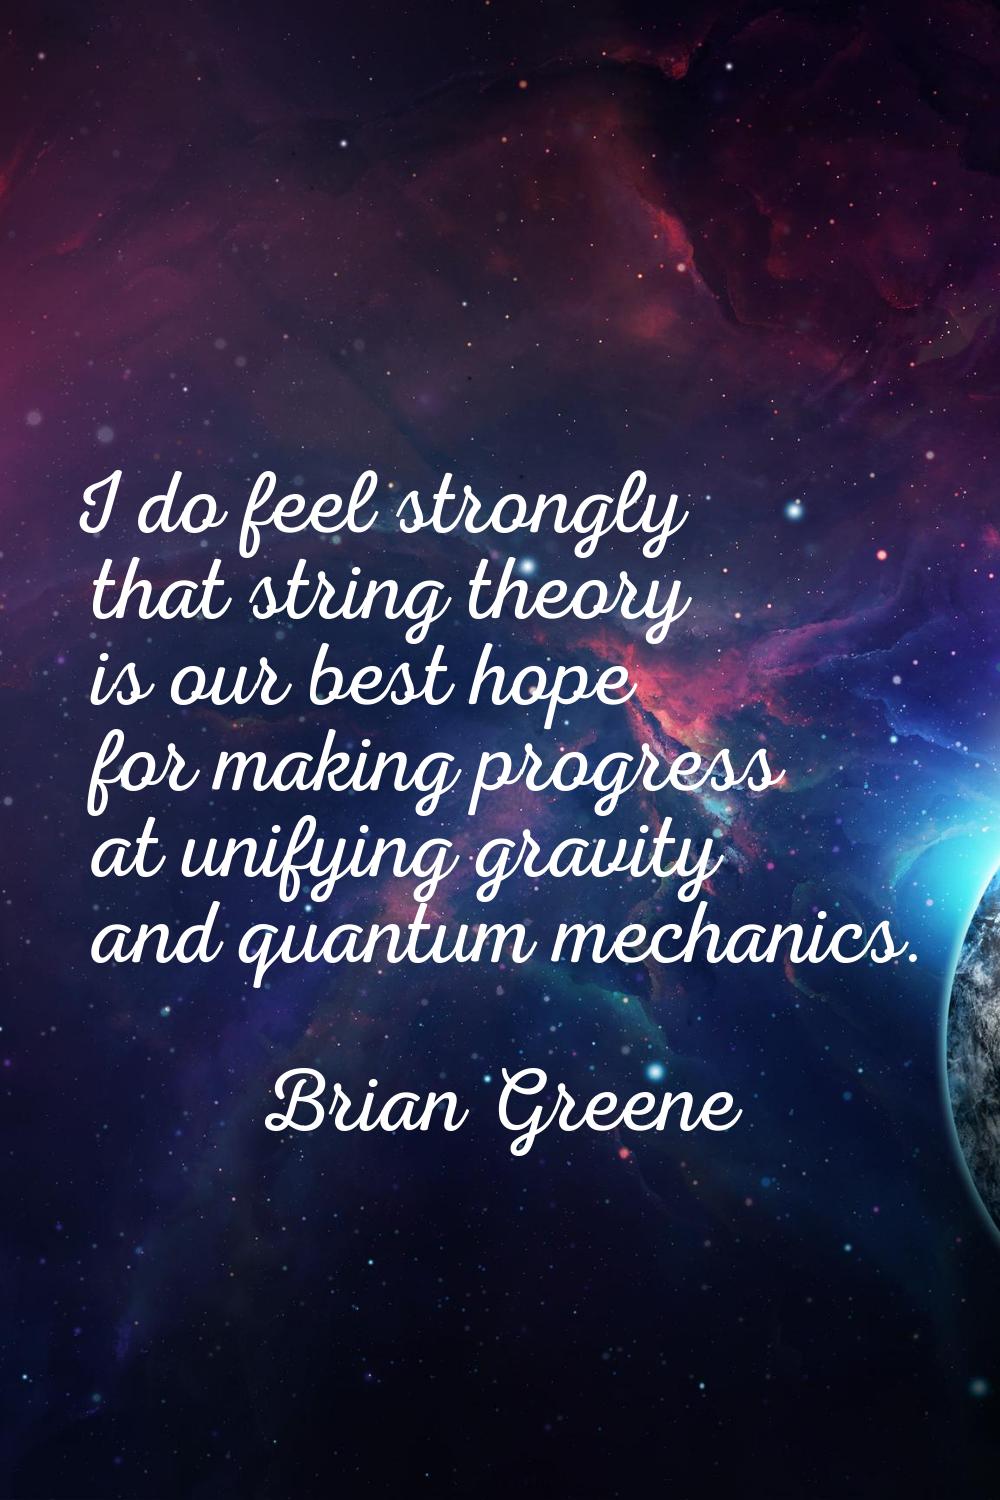 I do feel strongly that string theory is our best hope for making progress at unifying gravity and 